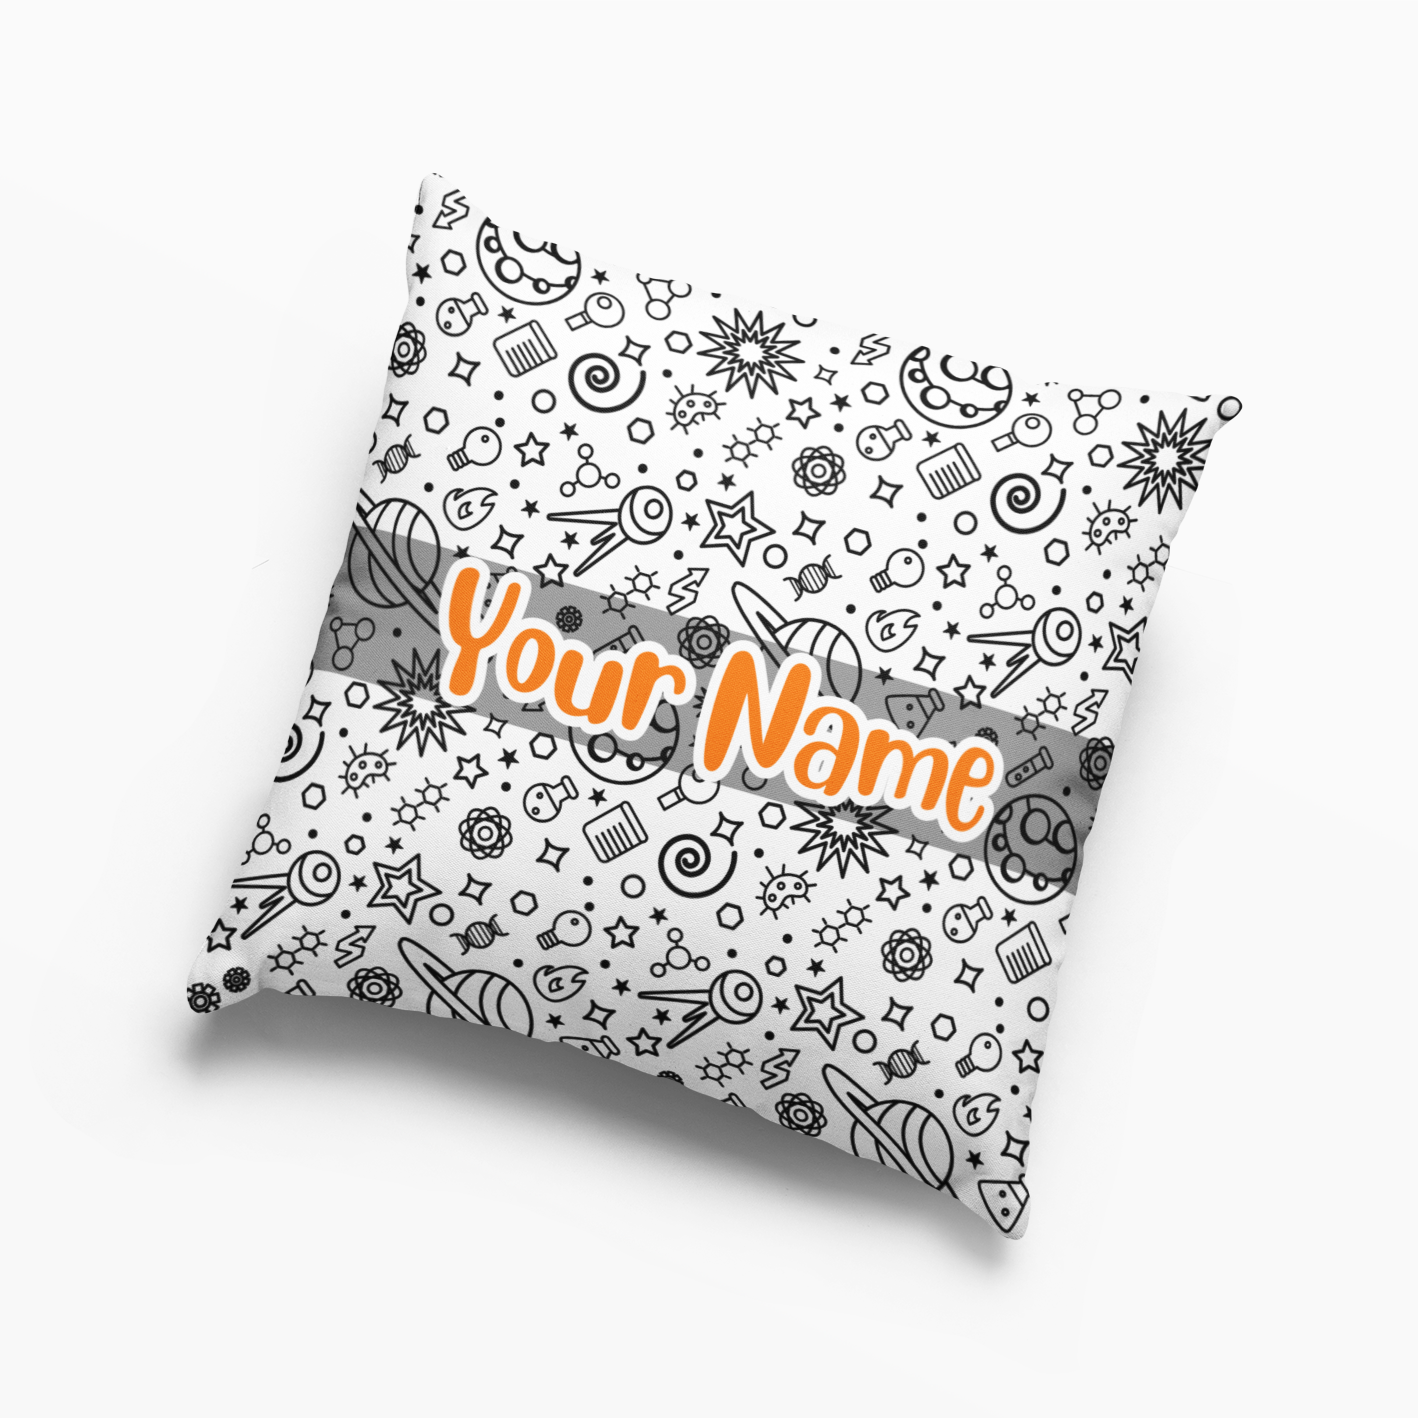 Funny Space Pillow personalized Pillow with Your name #5 Pillow Case